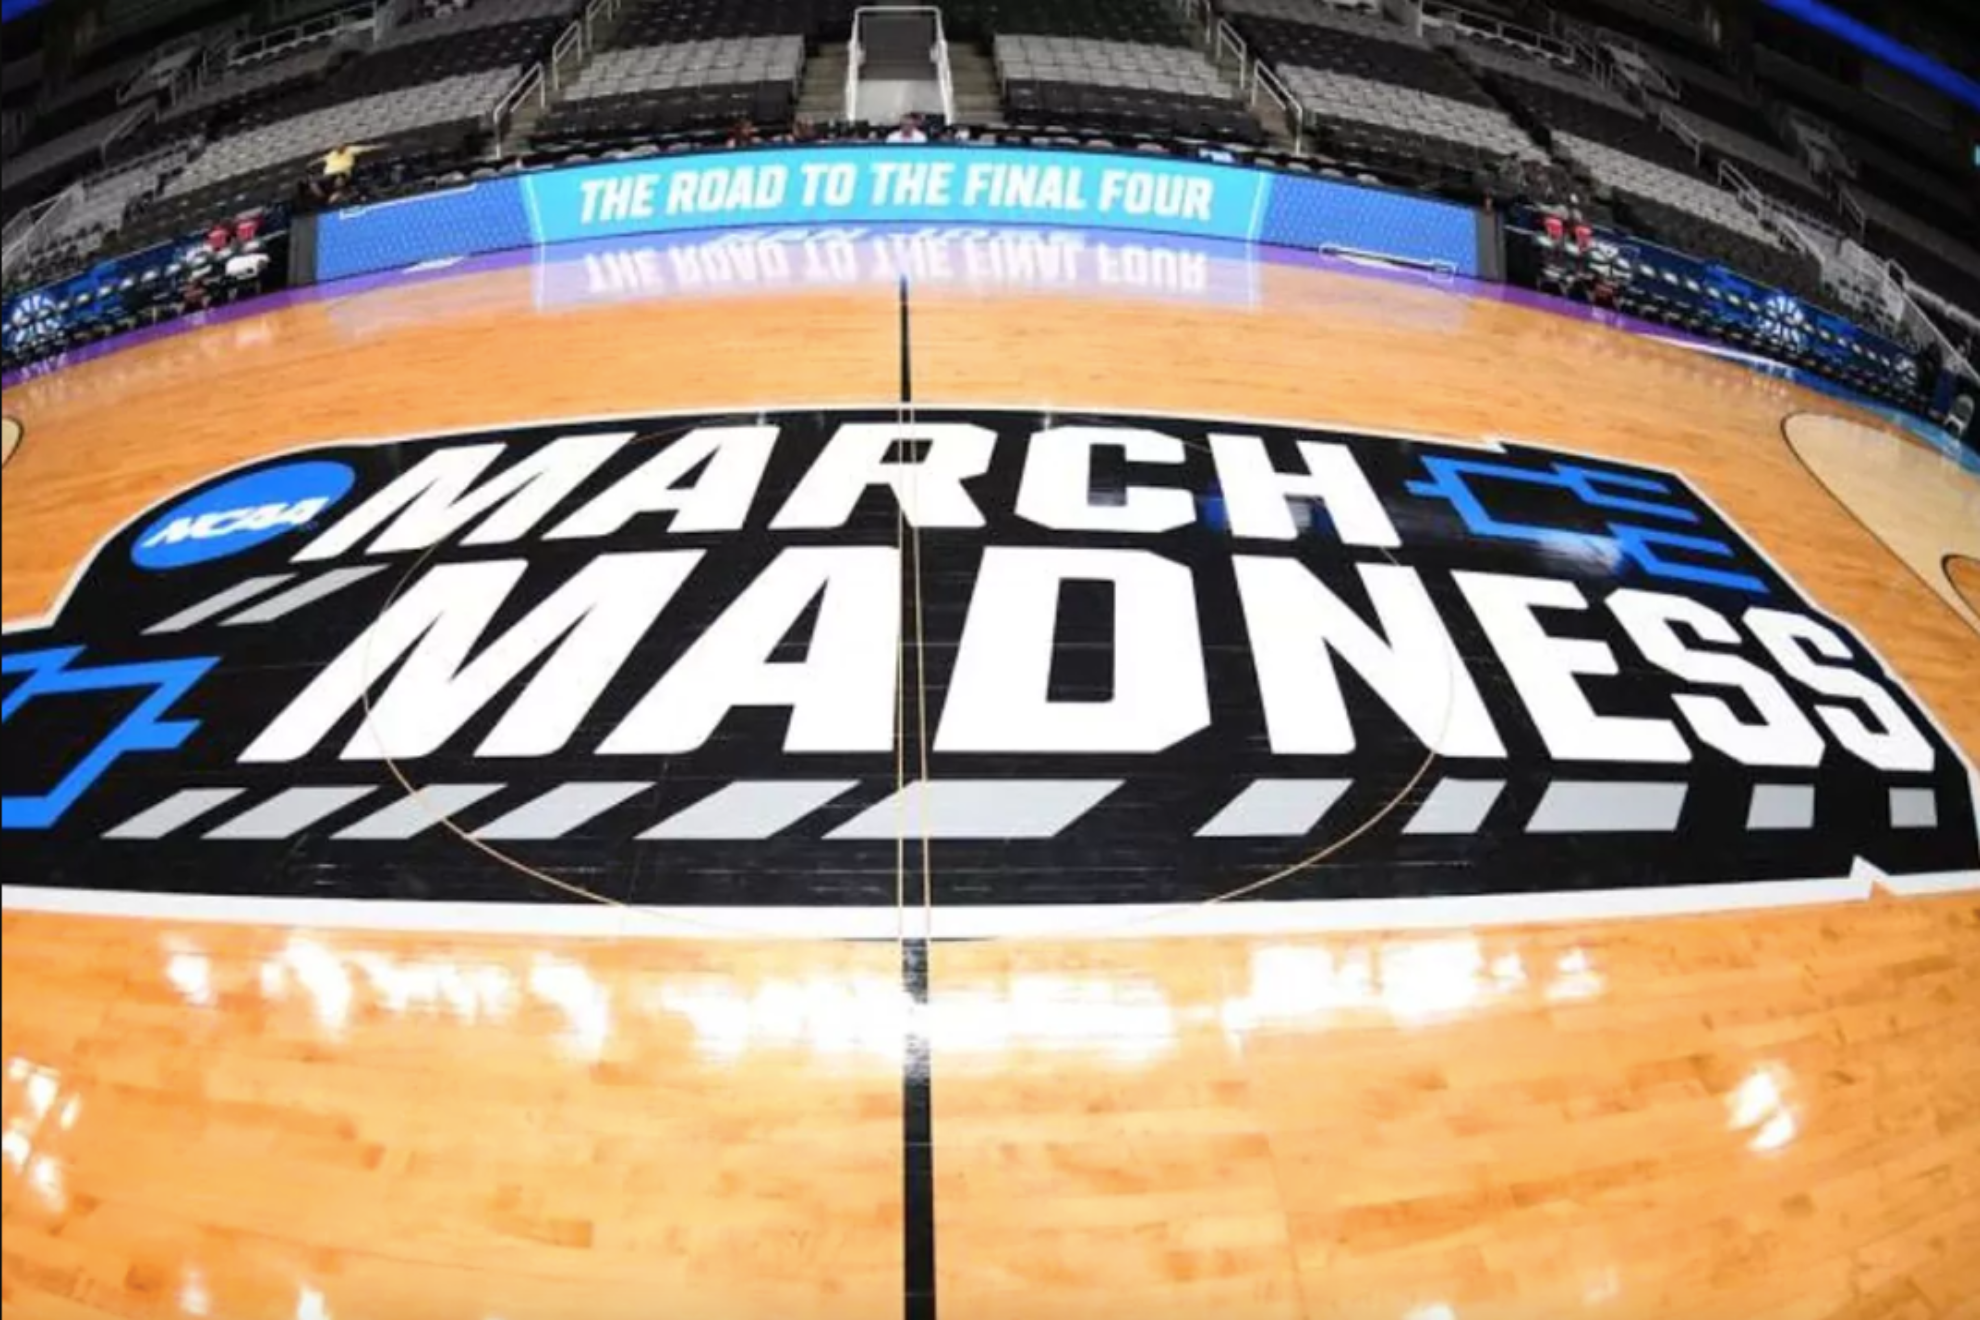 March Madness History: What is the biggest upset in March Madness history?